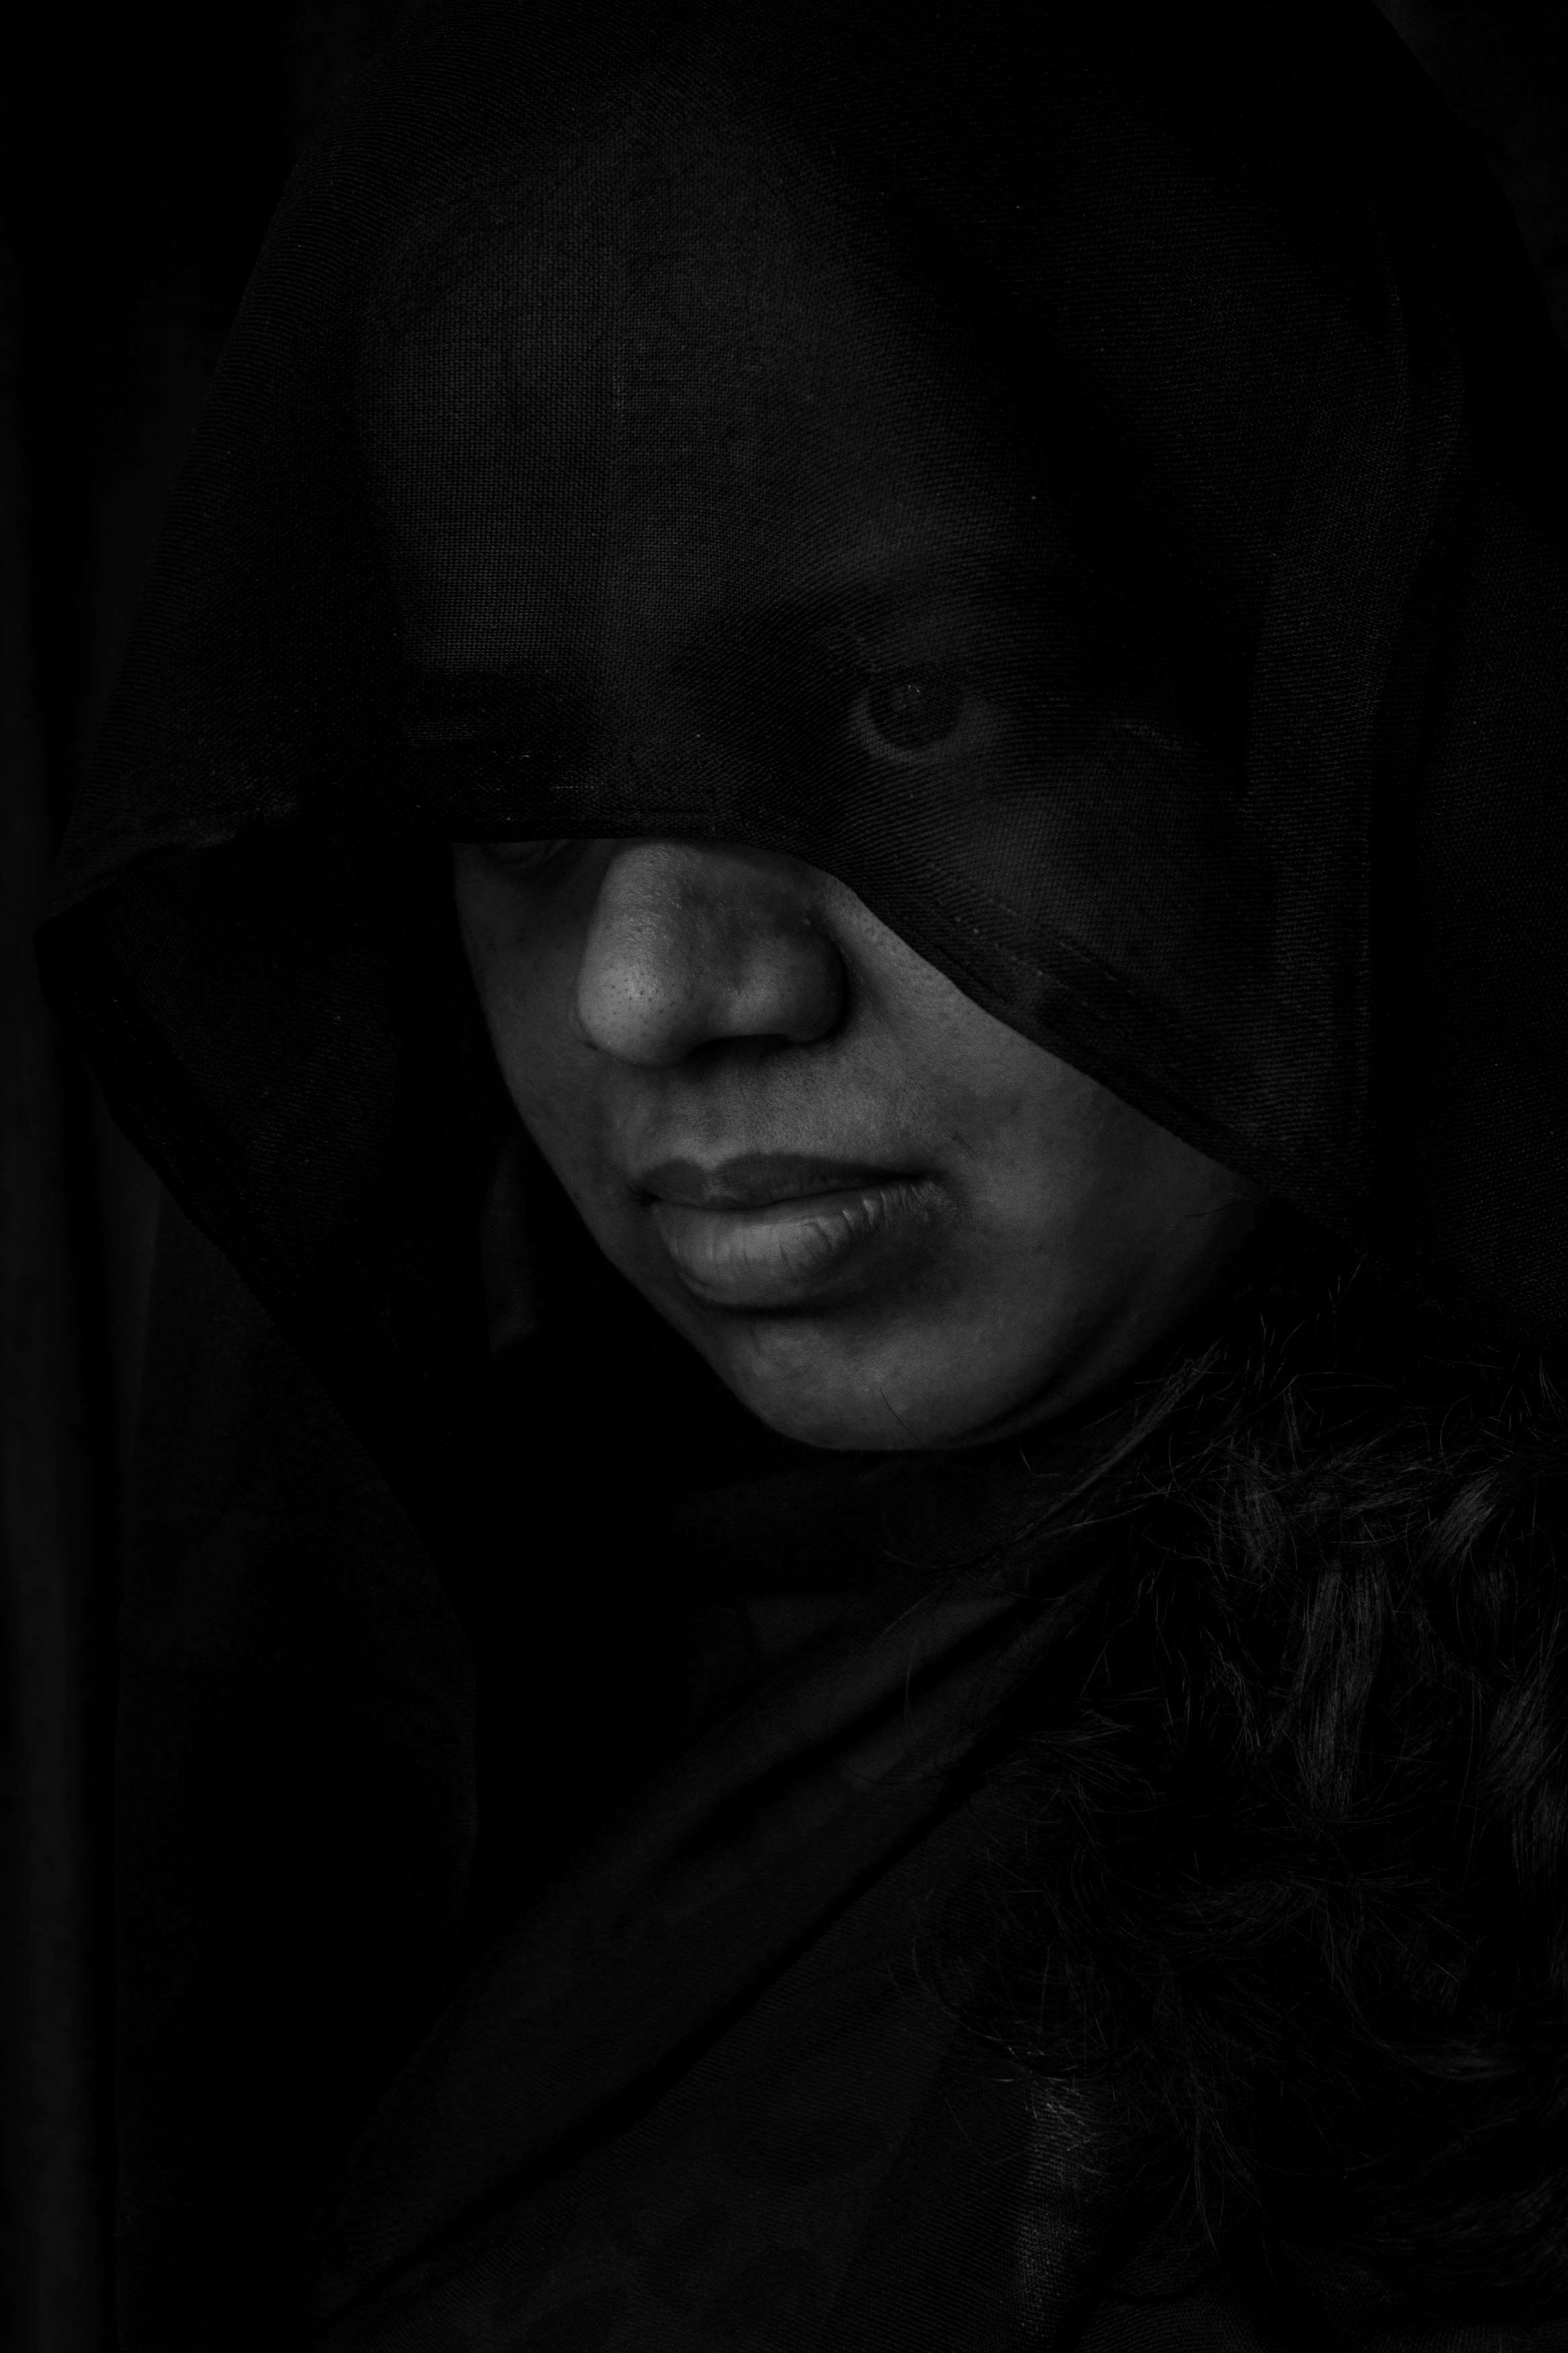 woman in black hijab in grayscale photography